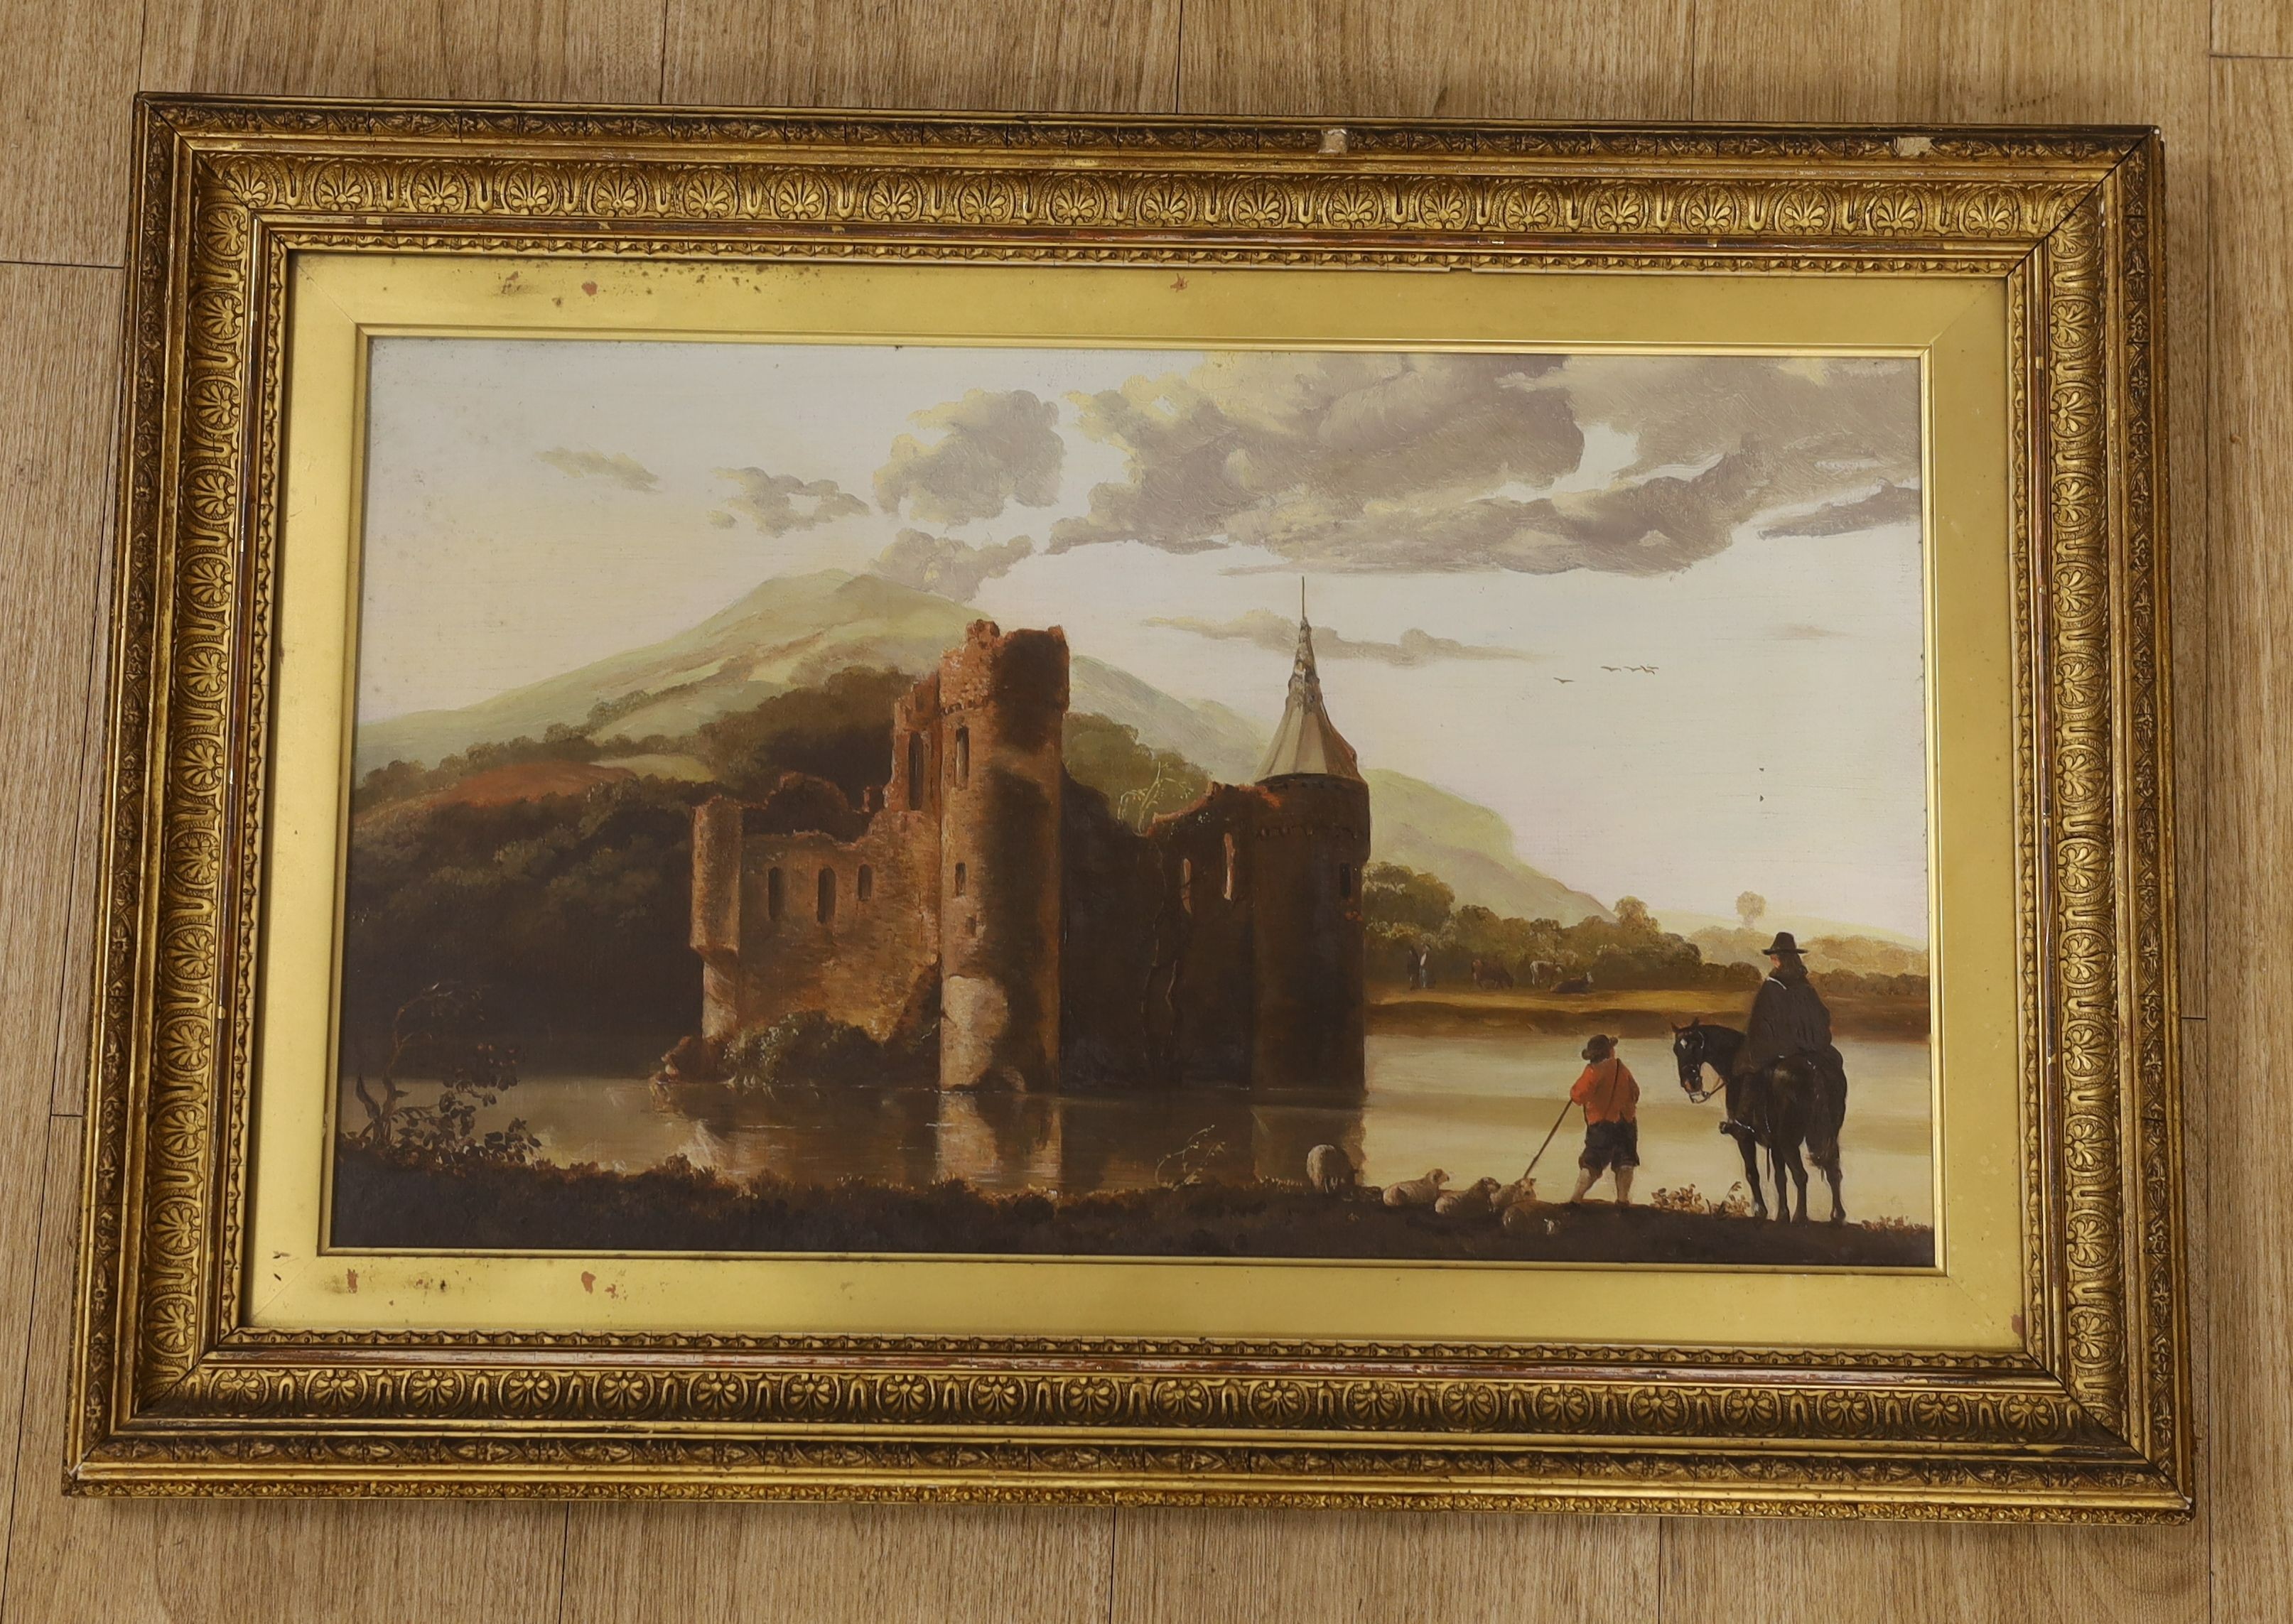 19th century English School, oil on canvas, Flemish landscape with figures overlooking a castle, 30 x 52cm